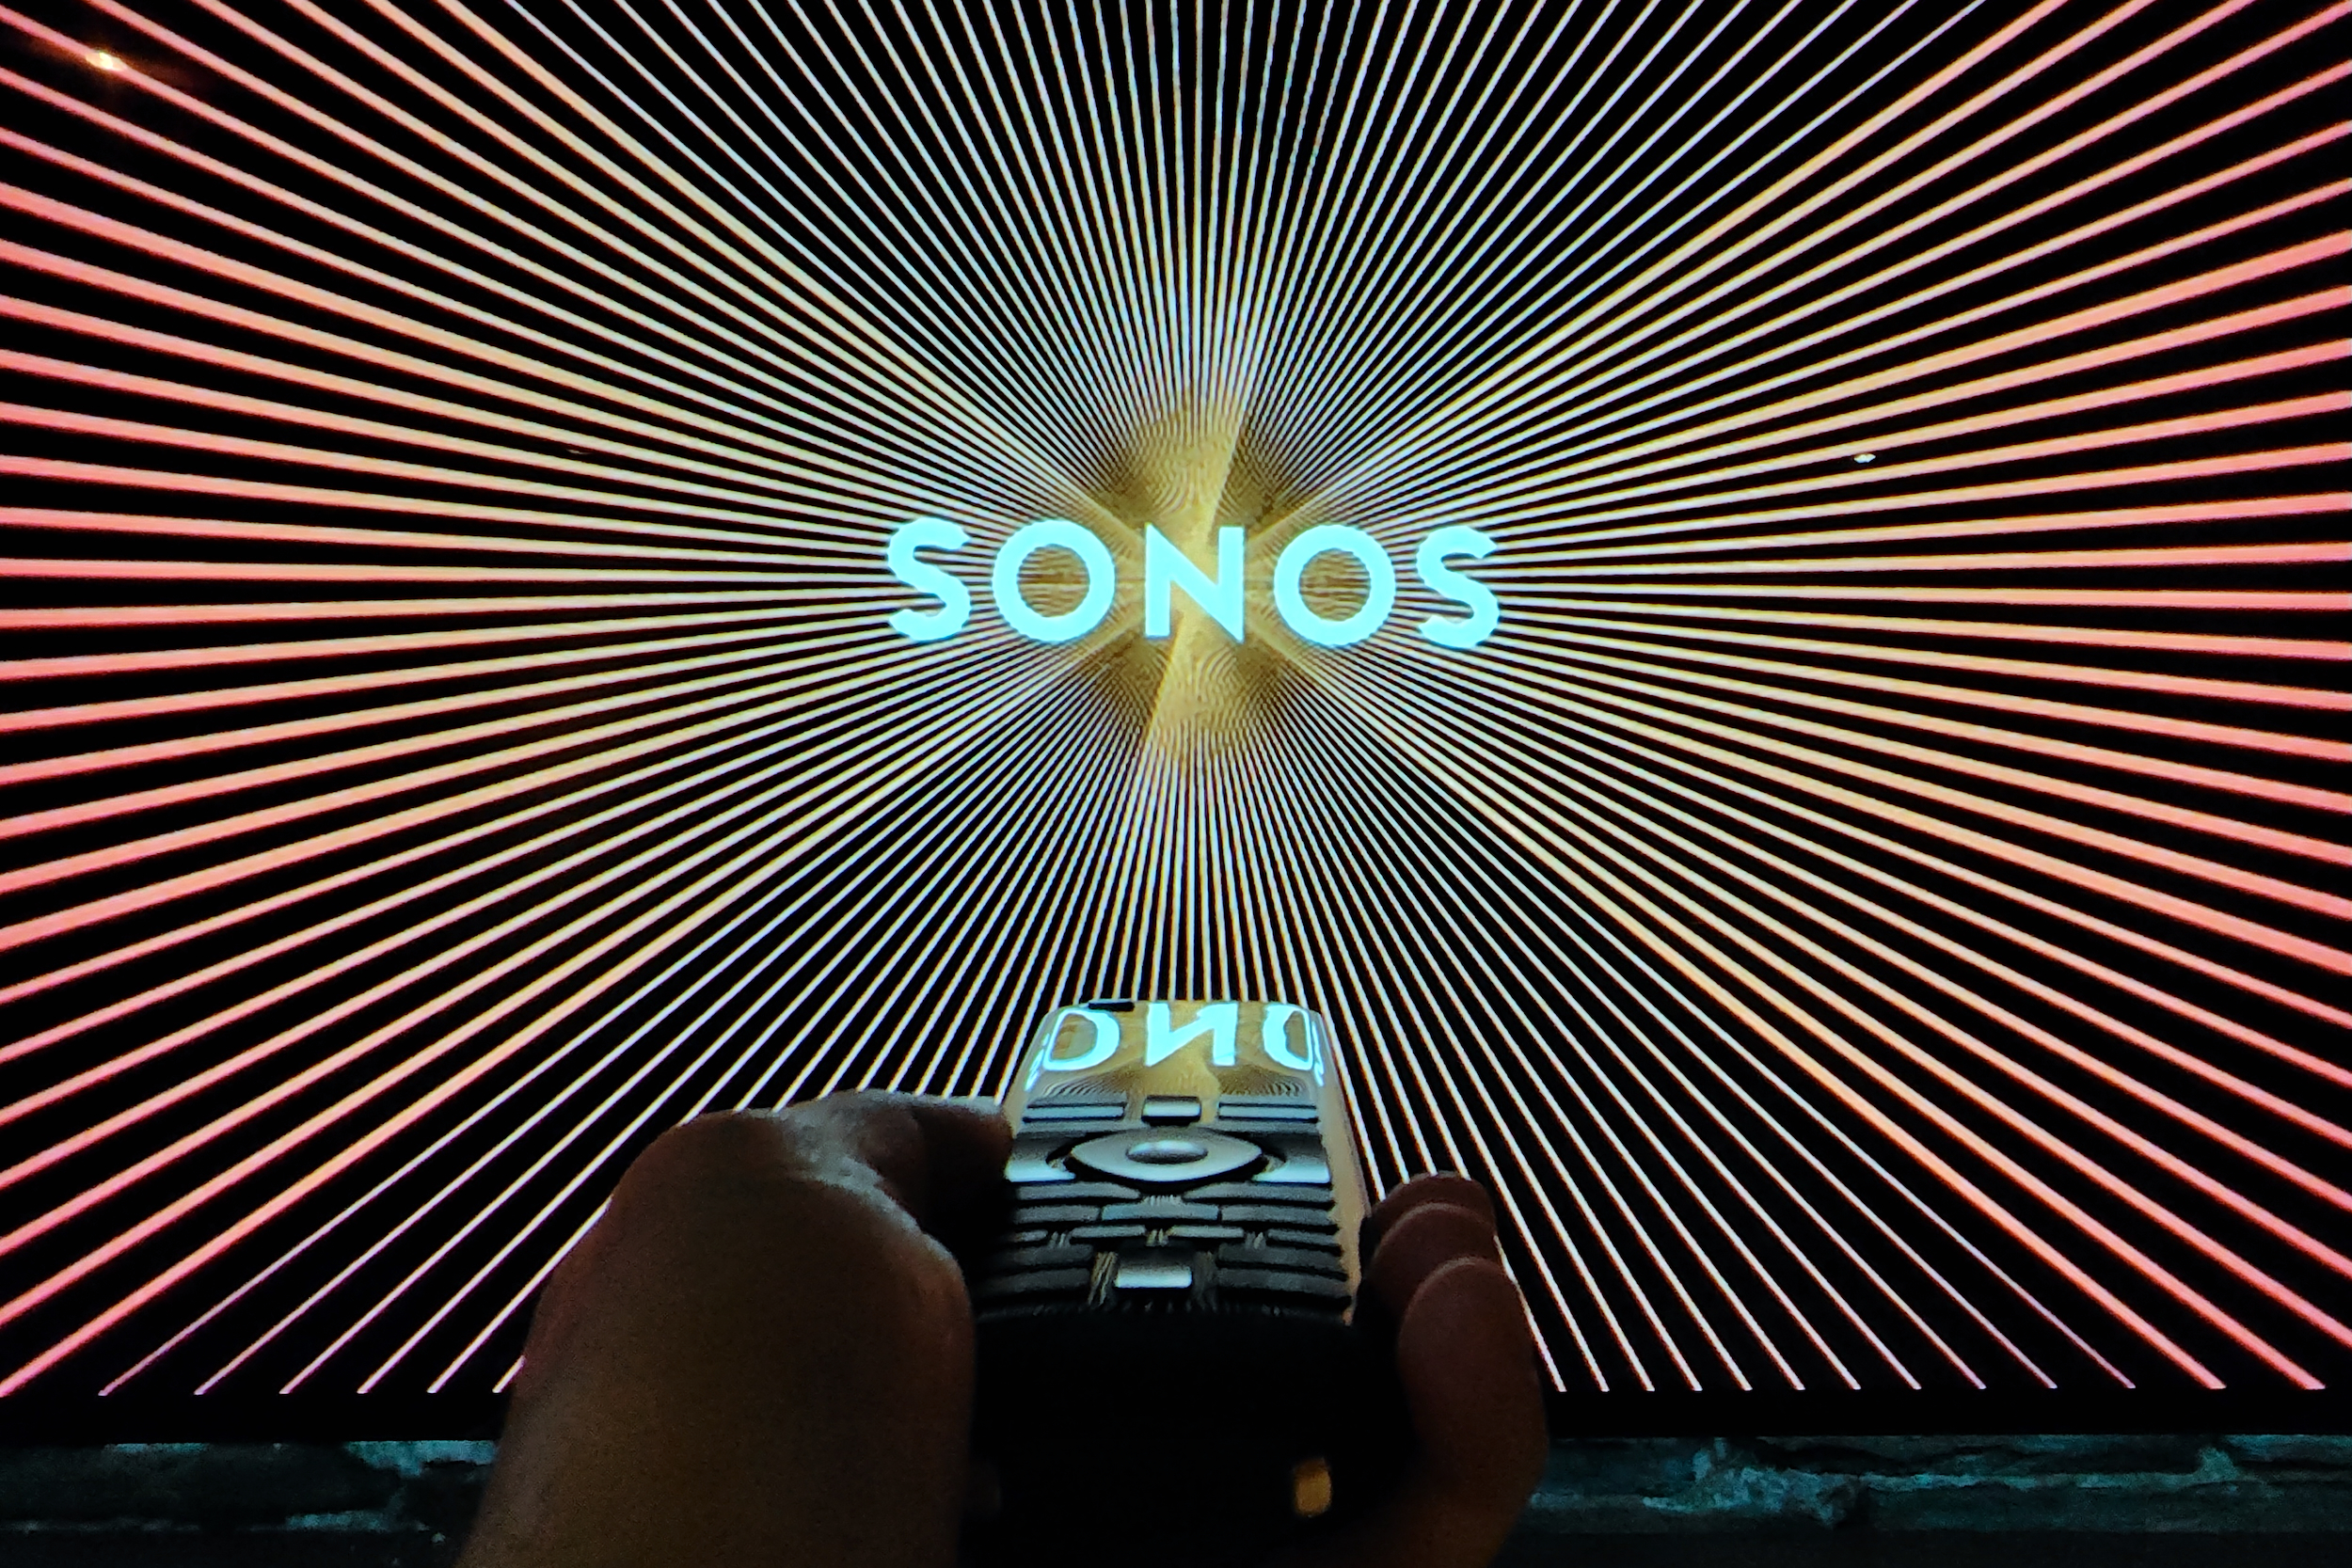 A remote contol pointed at a TV displaying the Sonos logo.